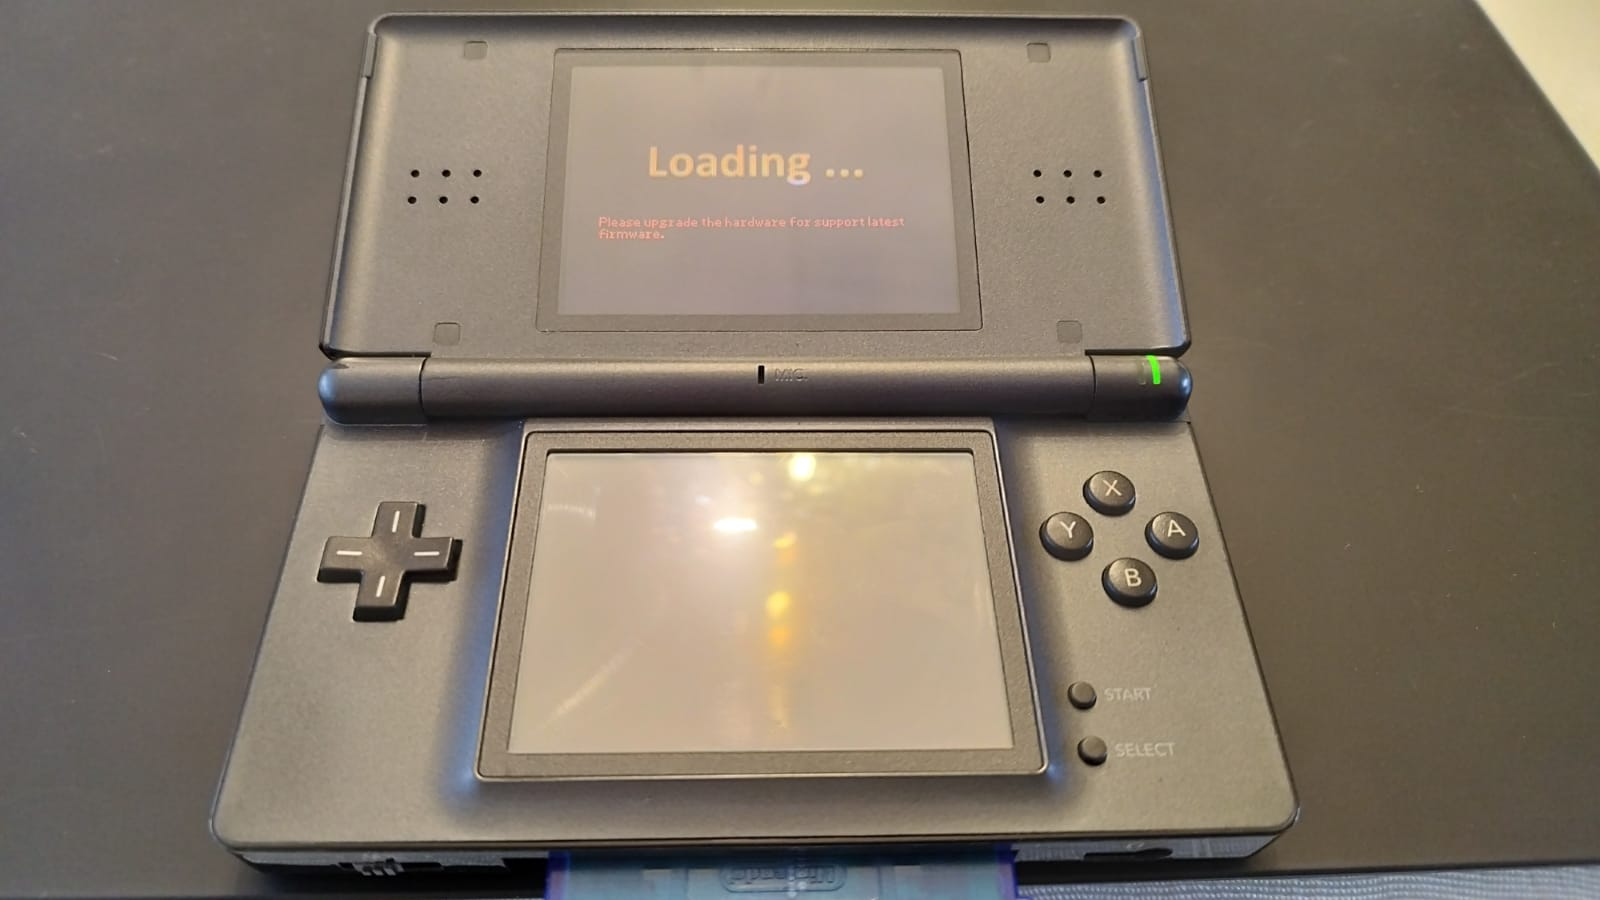 R4 (renovation) wont after i insert gba cart into slot 2 | GBAtemp.net The Independent Game Community